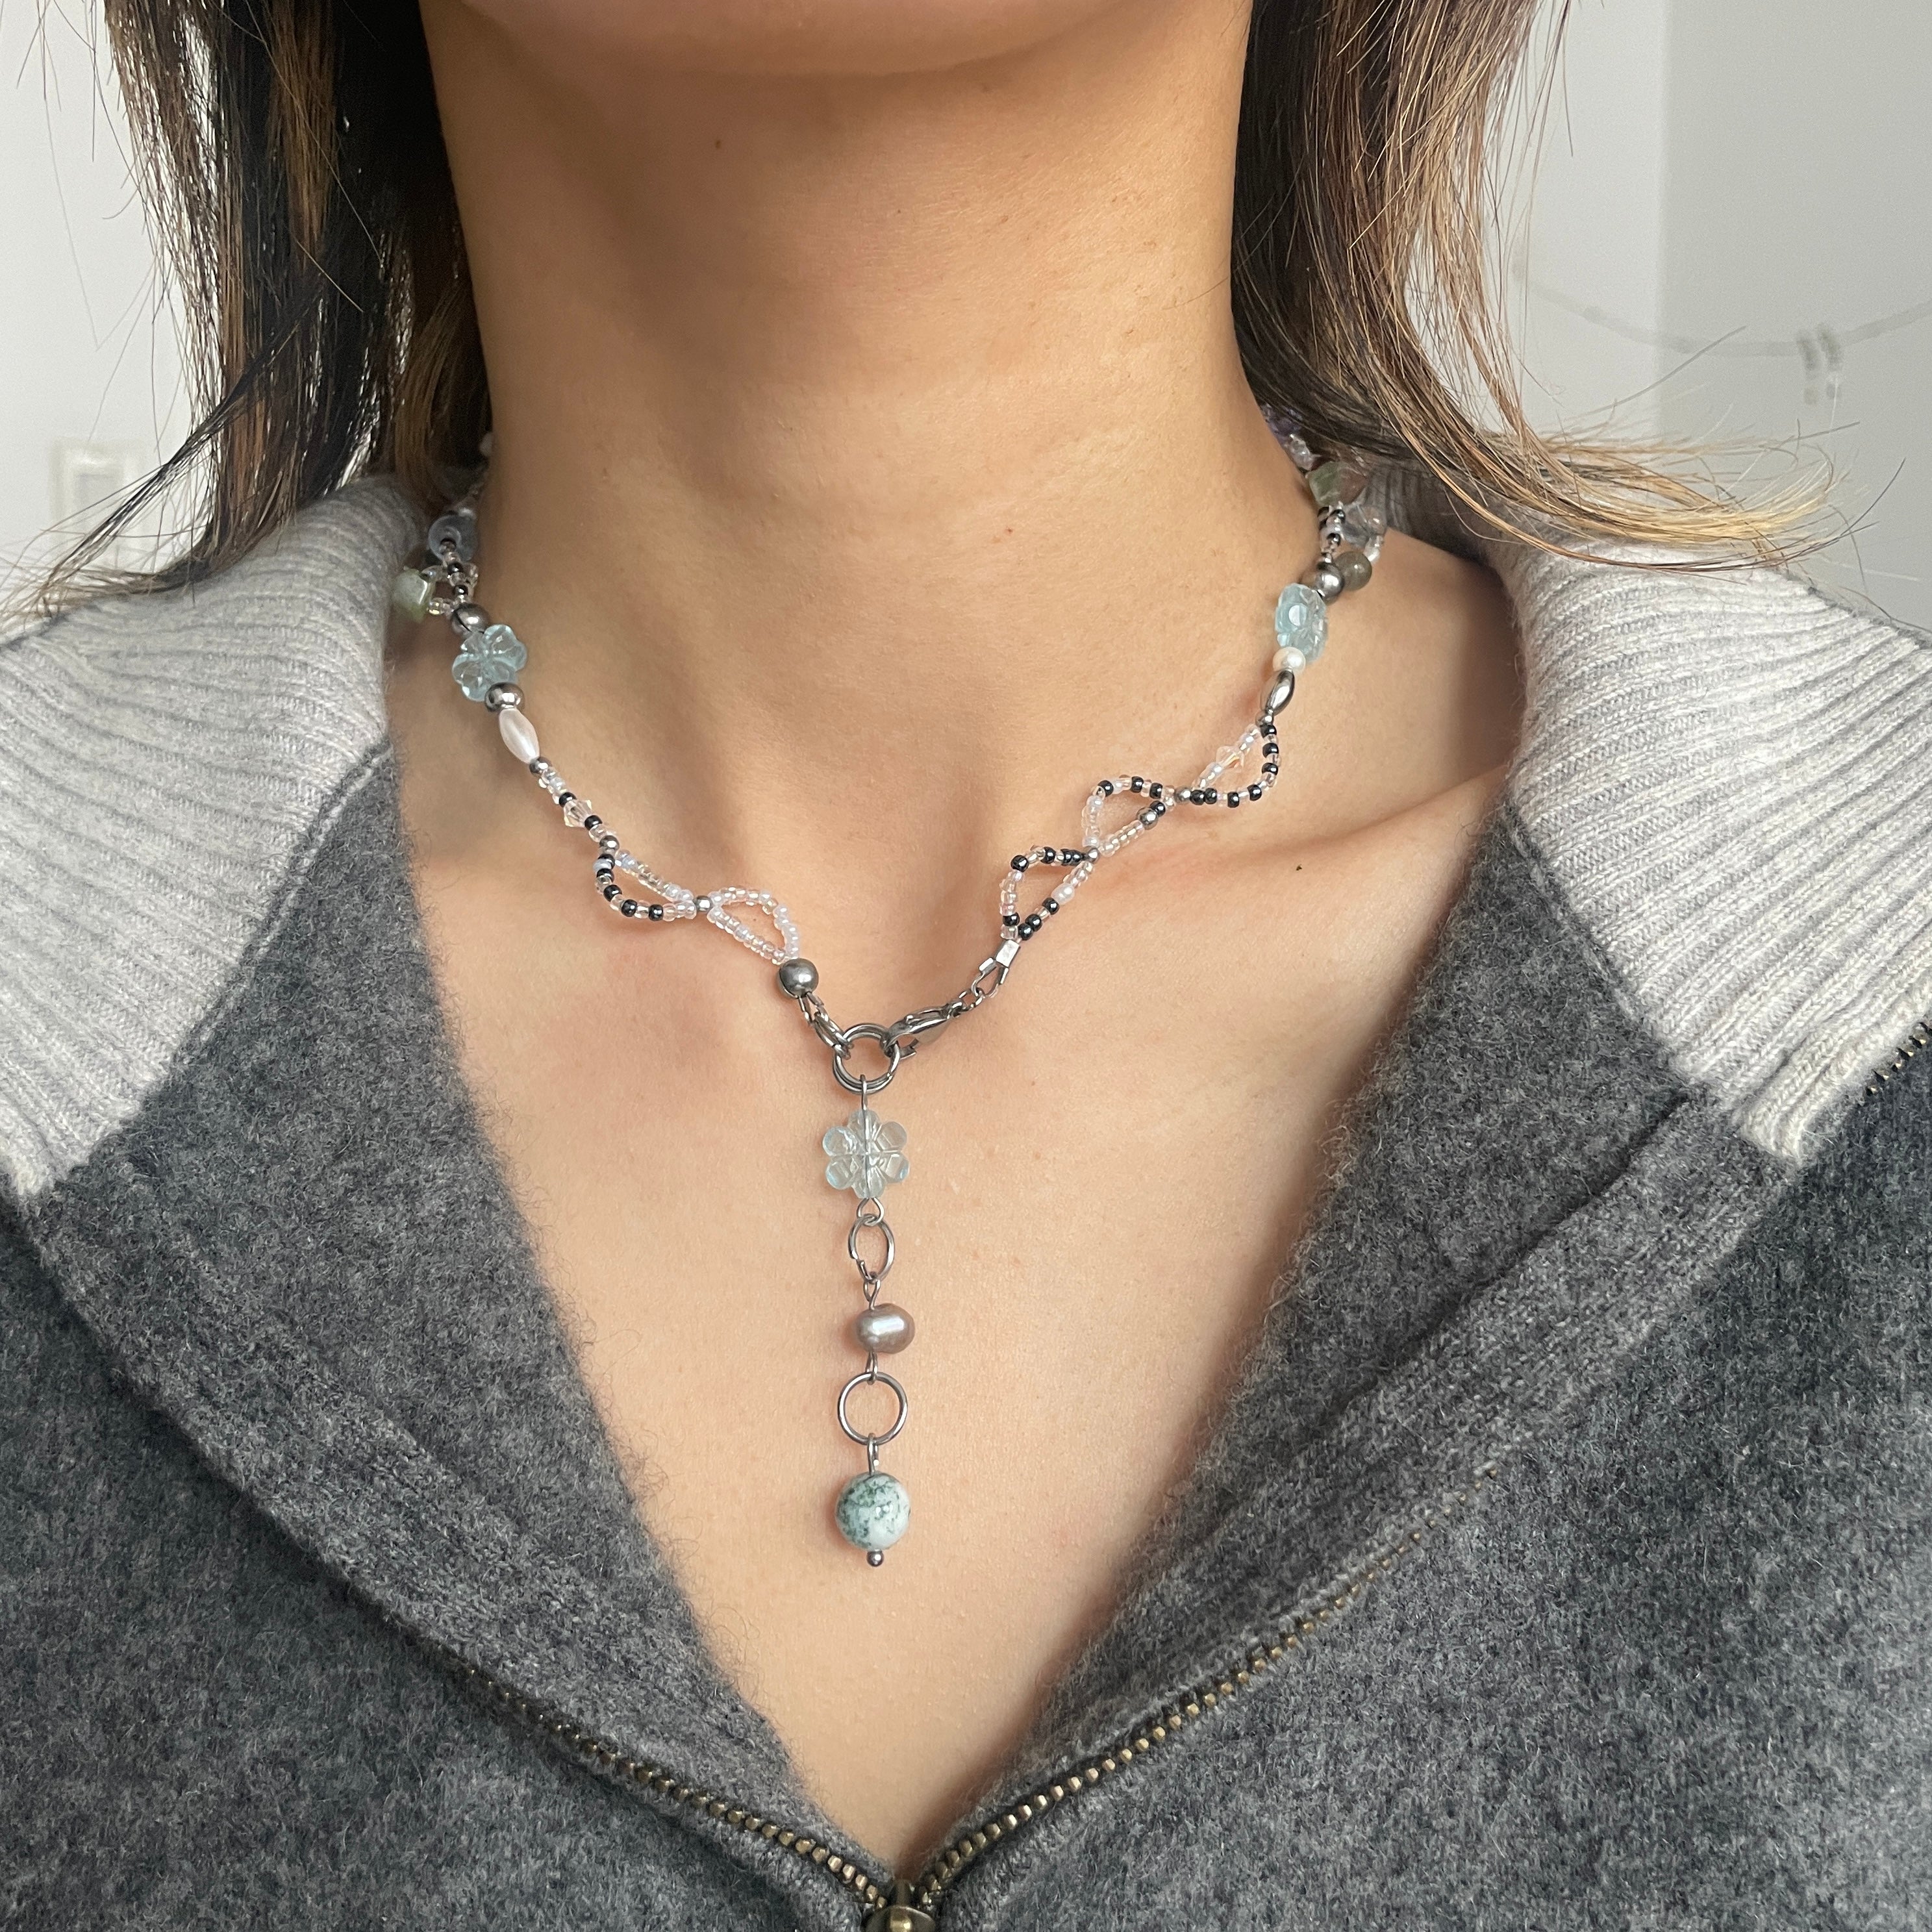 Nymph Necklace